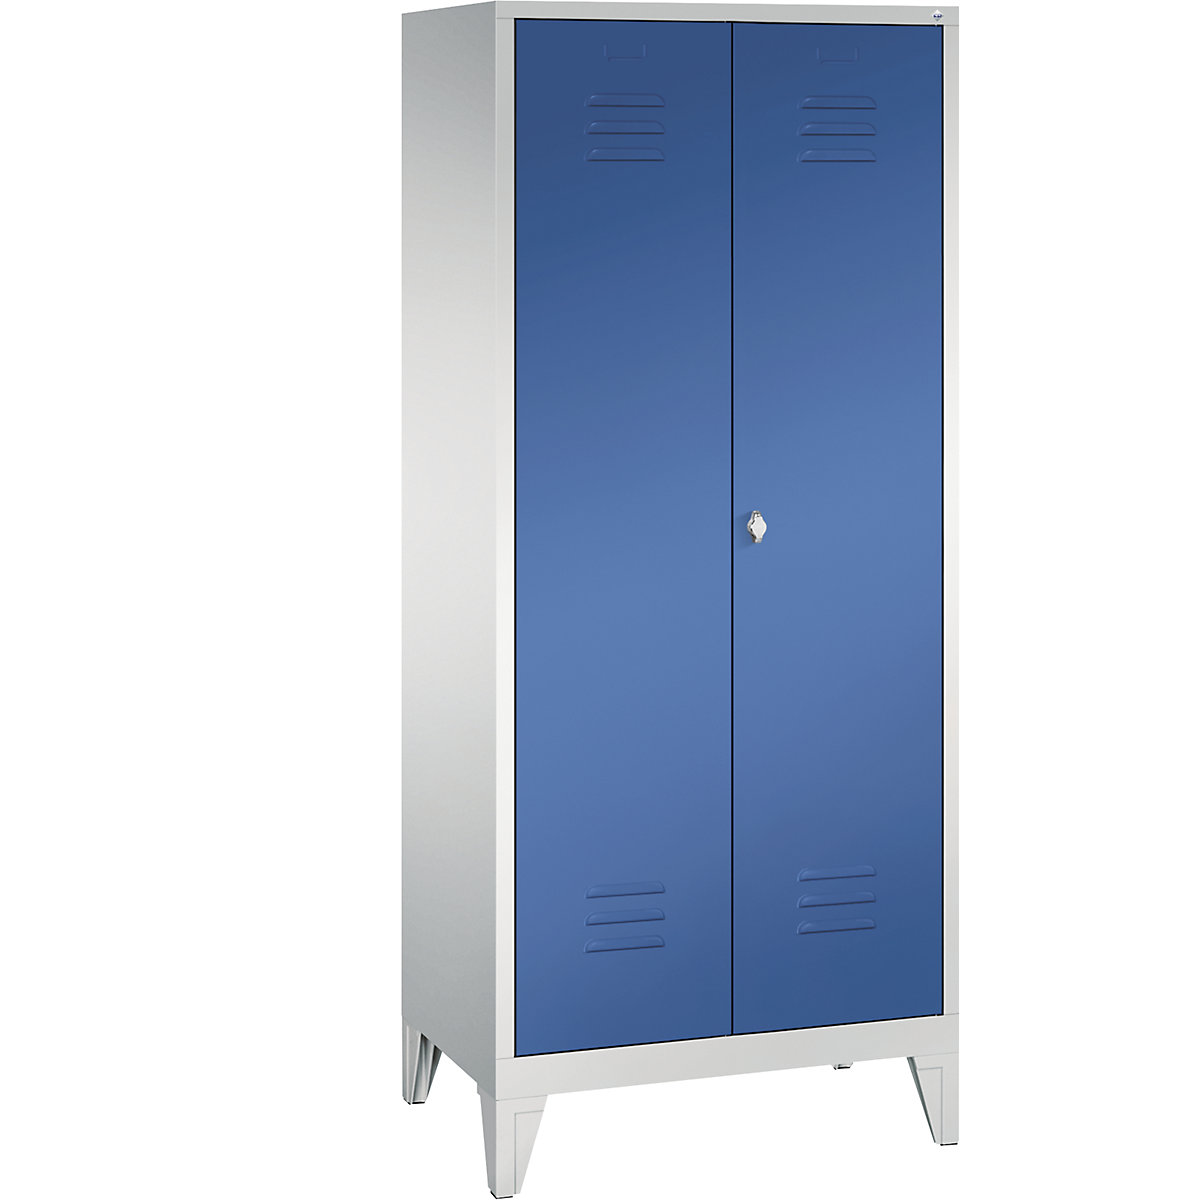 CLASSIC storage cupboard with feet, doors close in the middle – C+P, 2 compartments, compartment width 400 mm, light grey / gentian blue-7